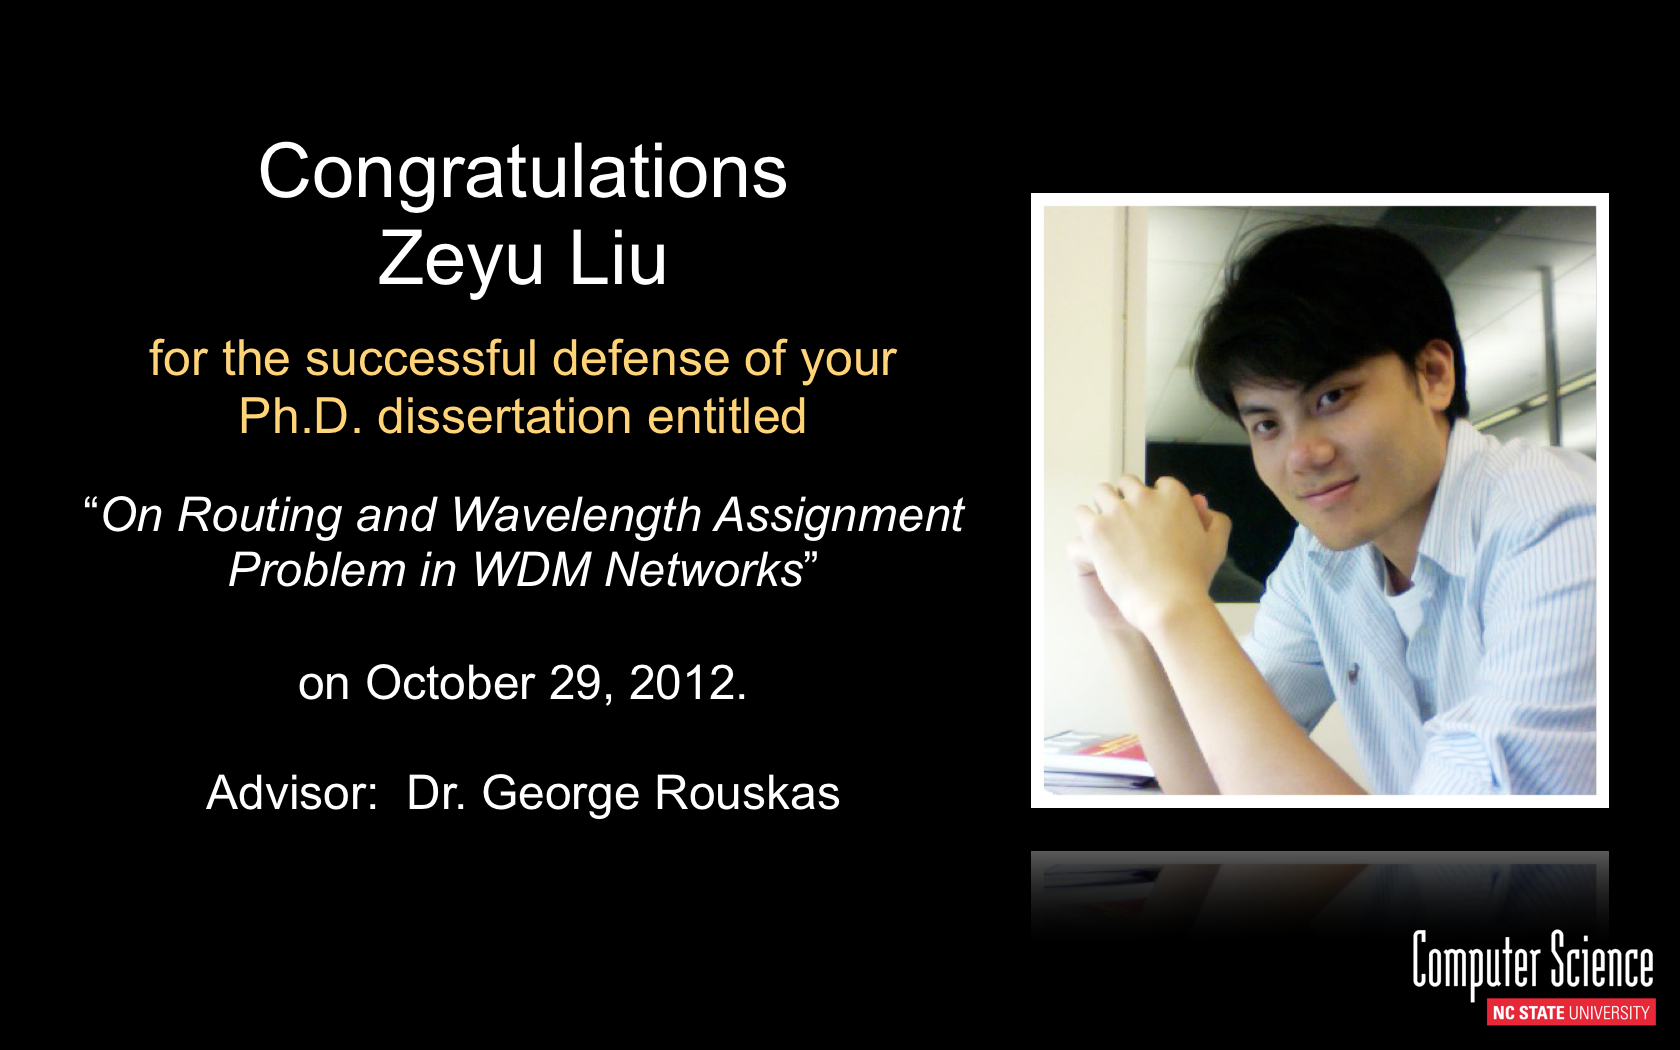 Picture of Zeyu Liu about his successful defense of PhD dissertation